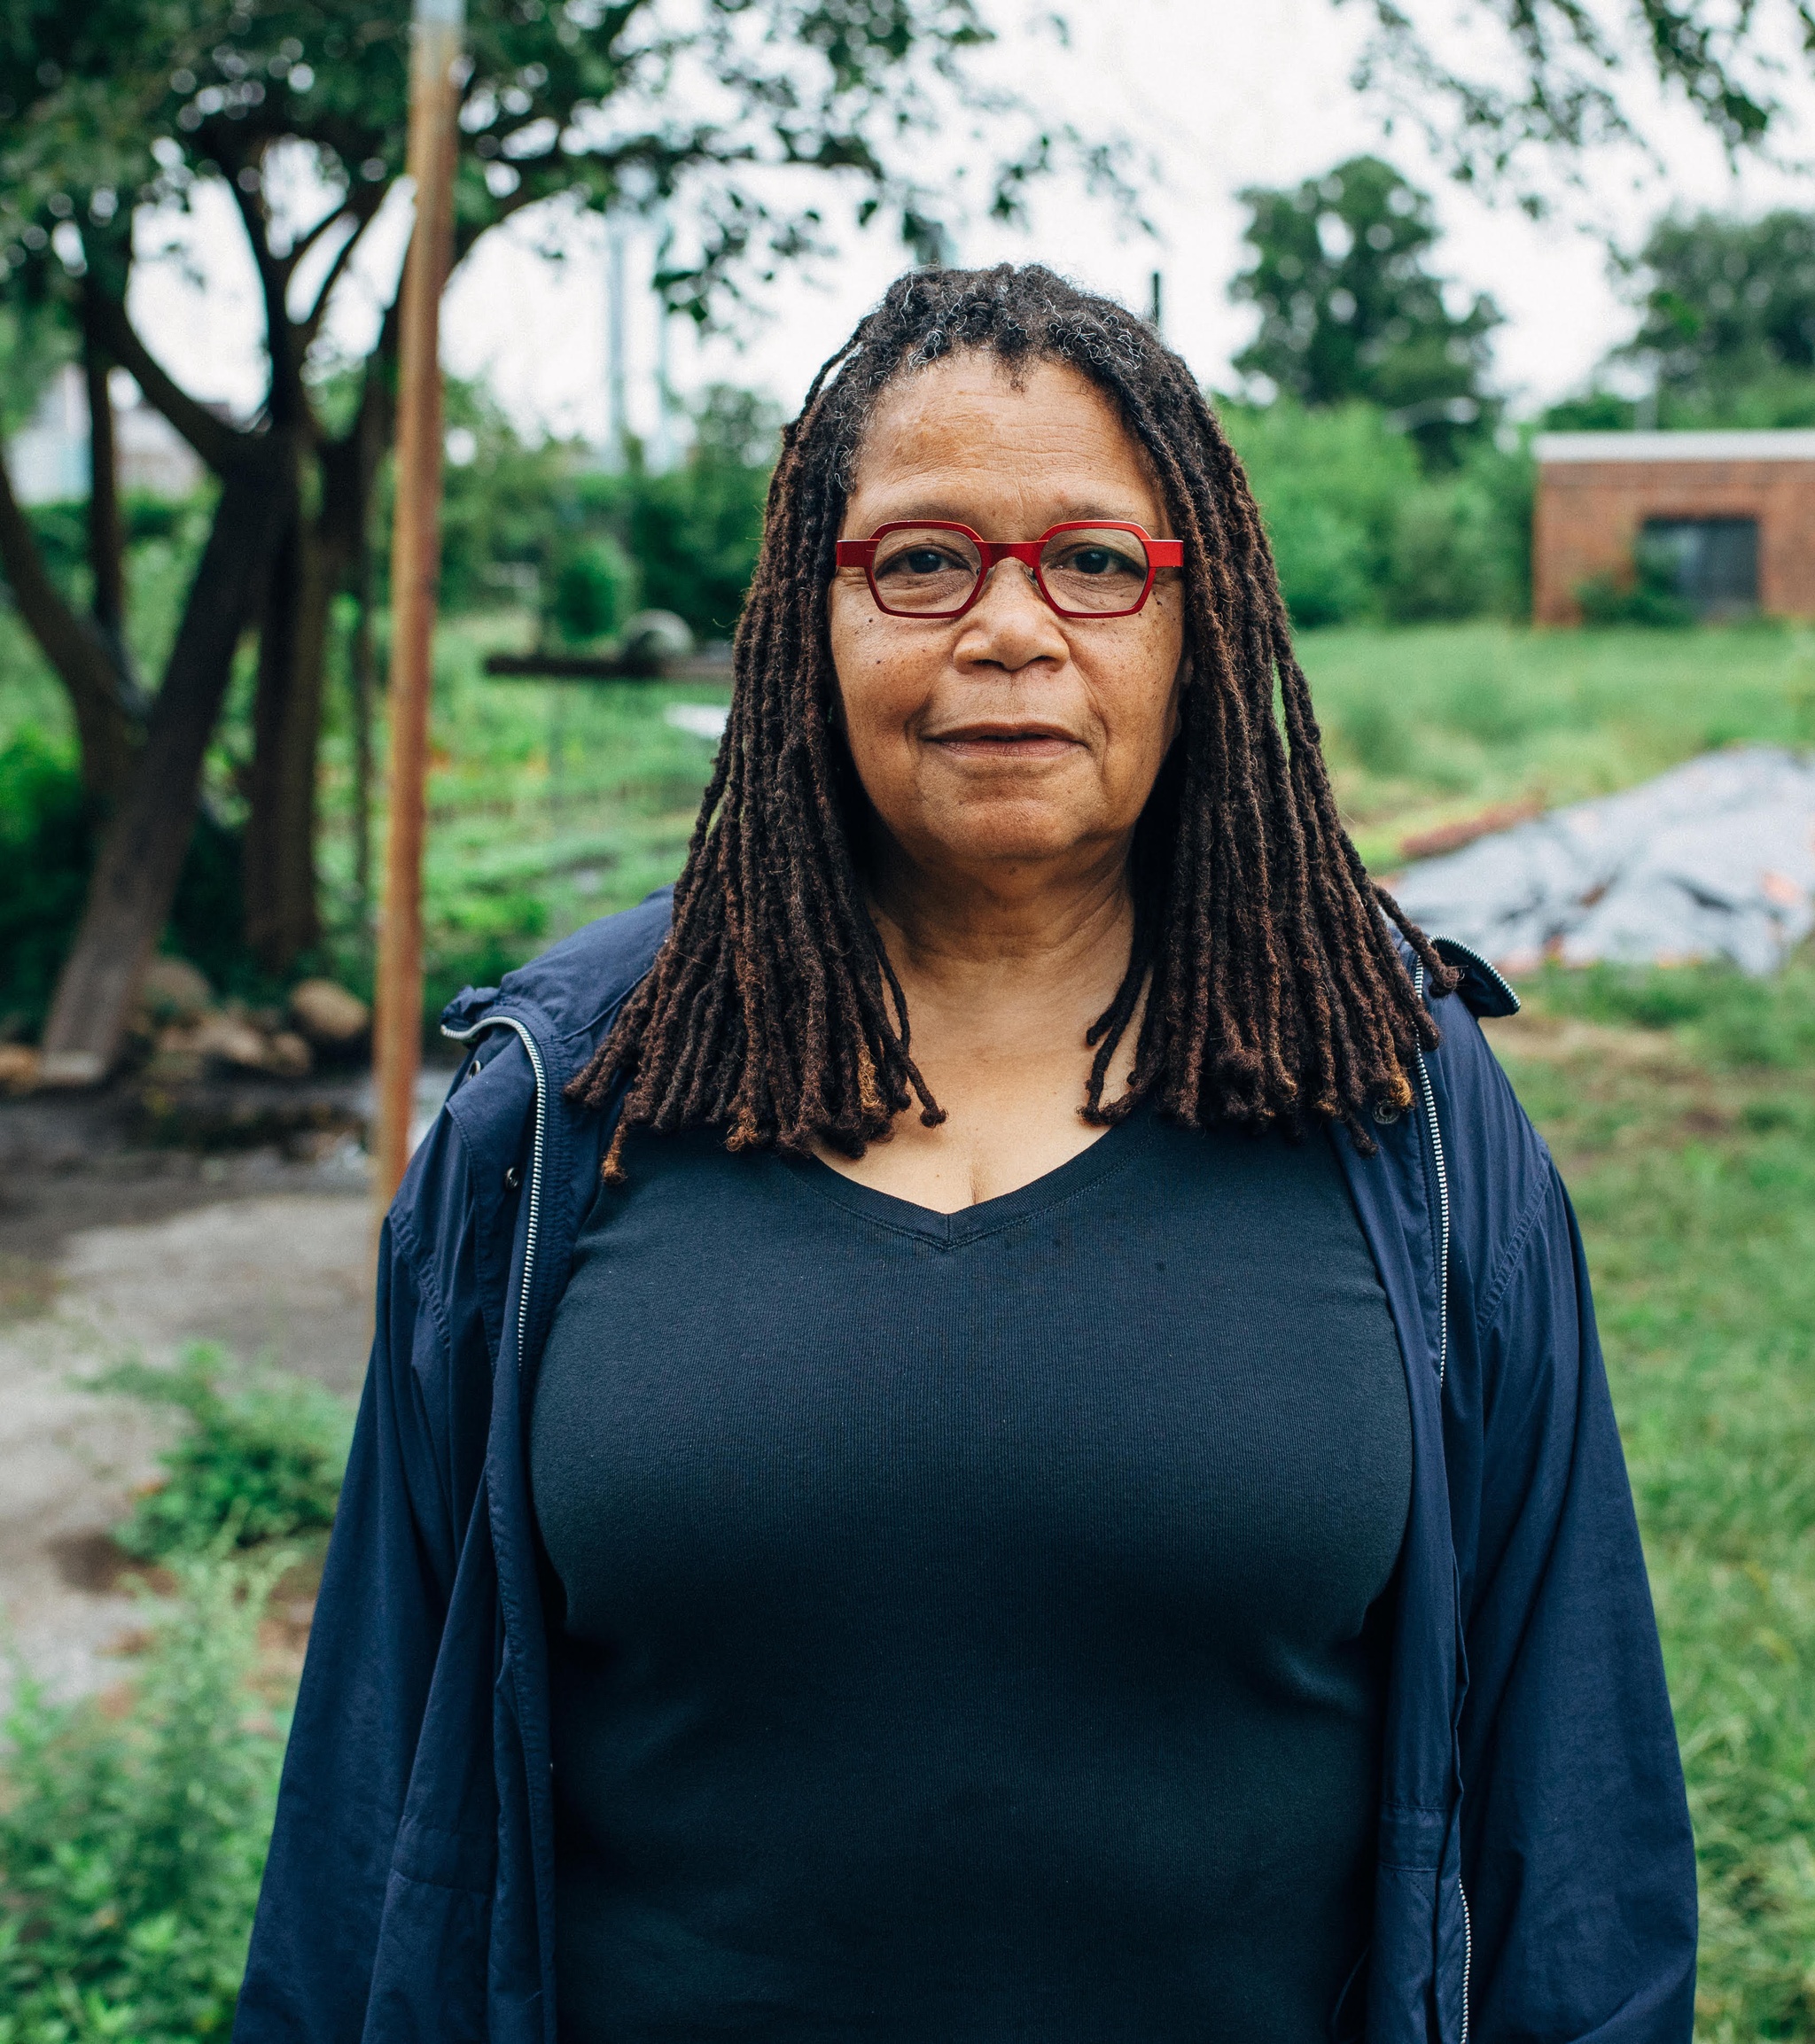 A Black woman with shoulder-length hair parted in the middle stands in front of a green, garden or backyard space. She wears red-framed glasses and smiles without opening her mouth.